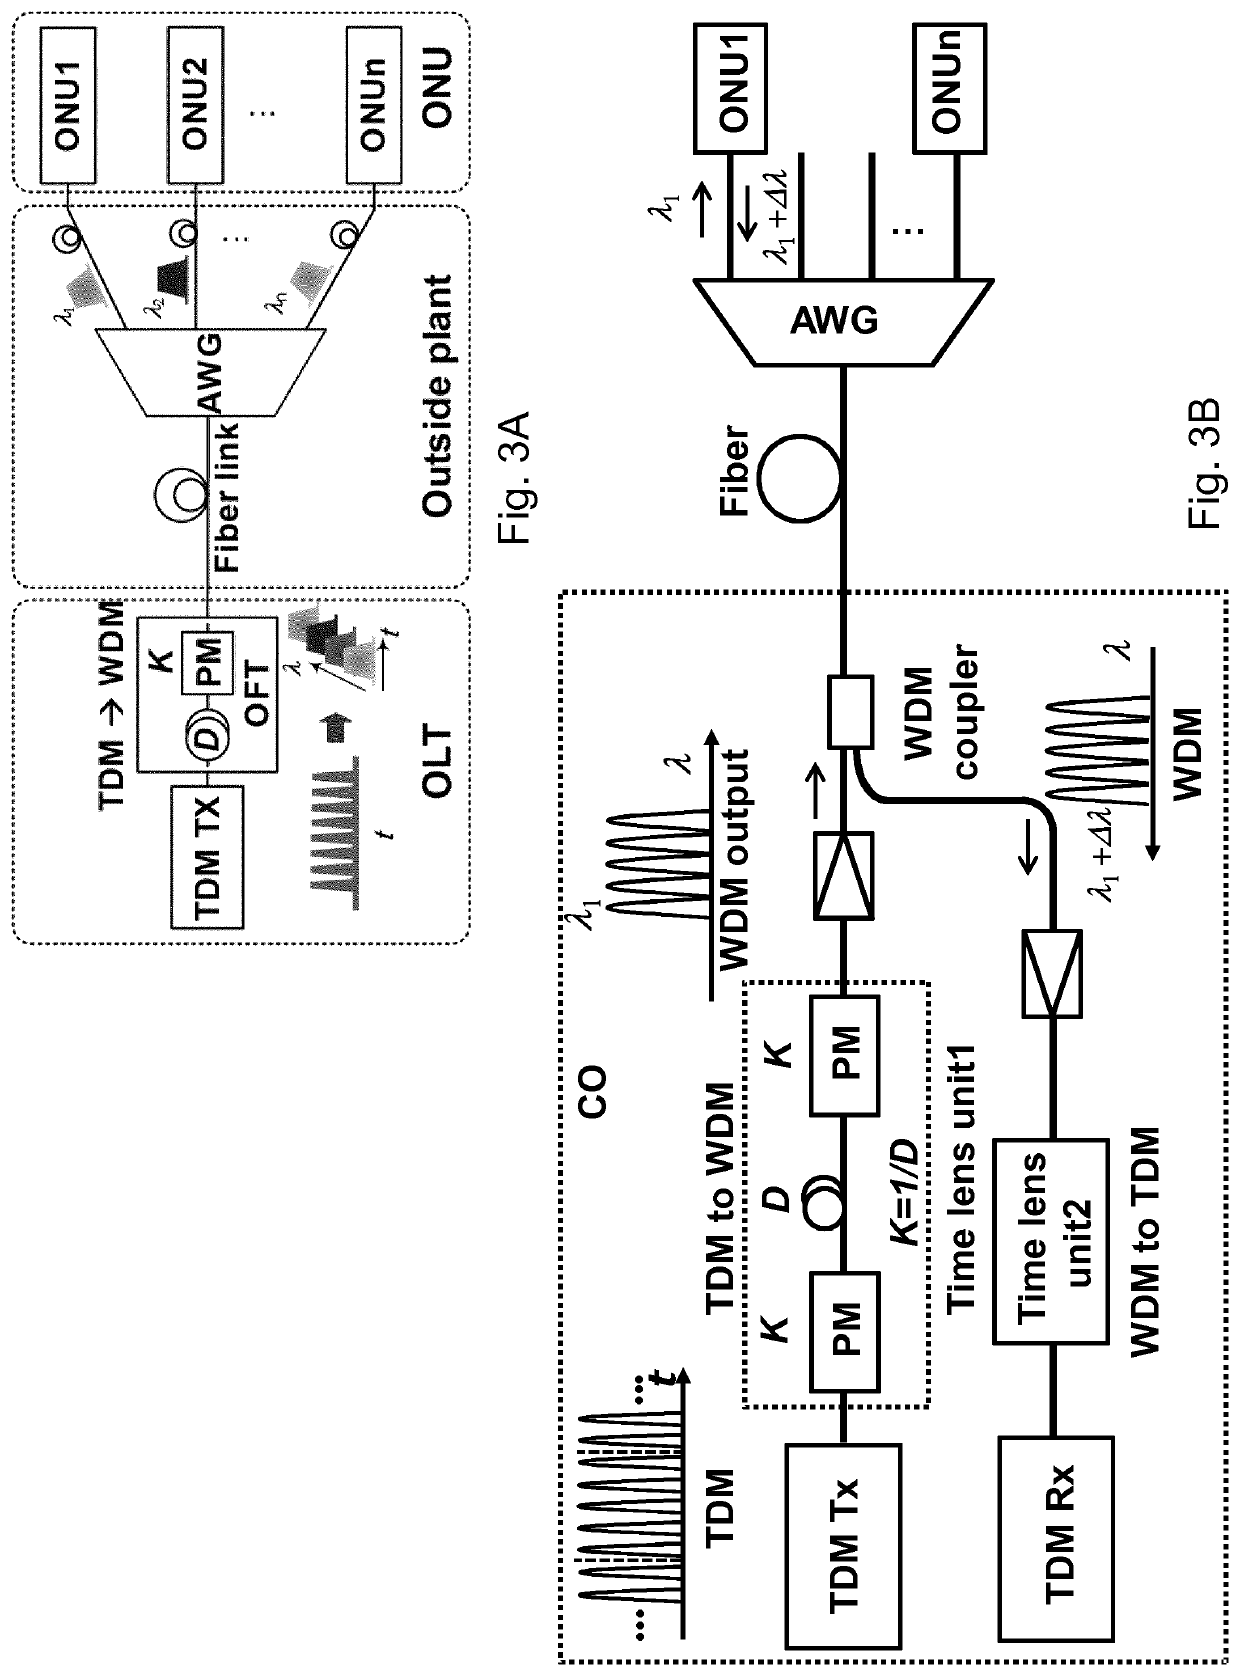 Optical line terminal and optical fiber access system with increased capacity